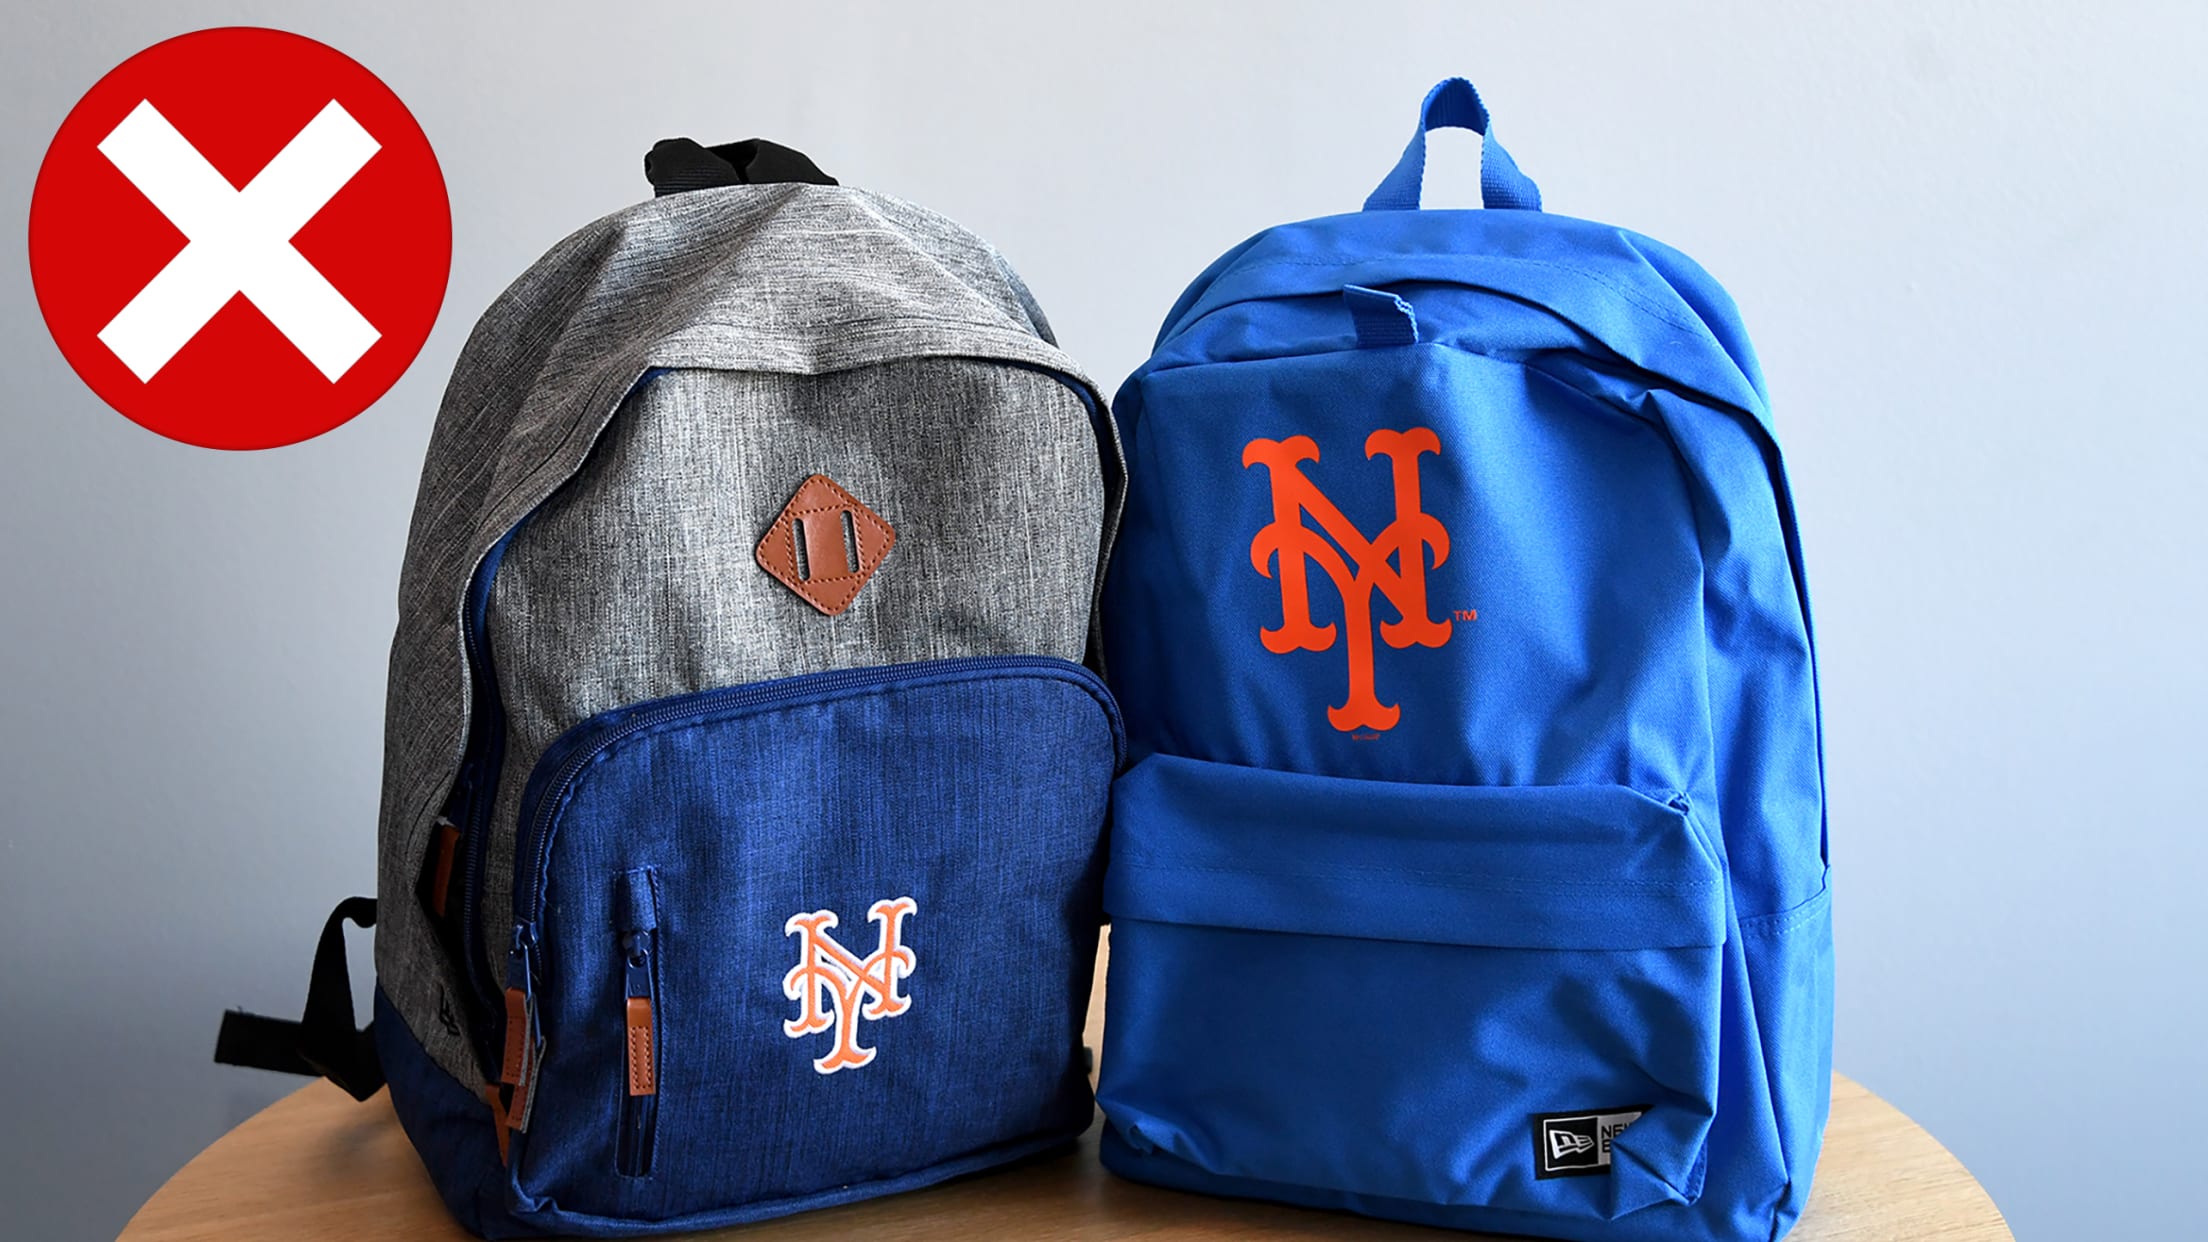 Guest post on the Citi Field backpack ban - The Mets Police